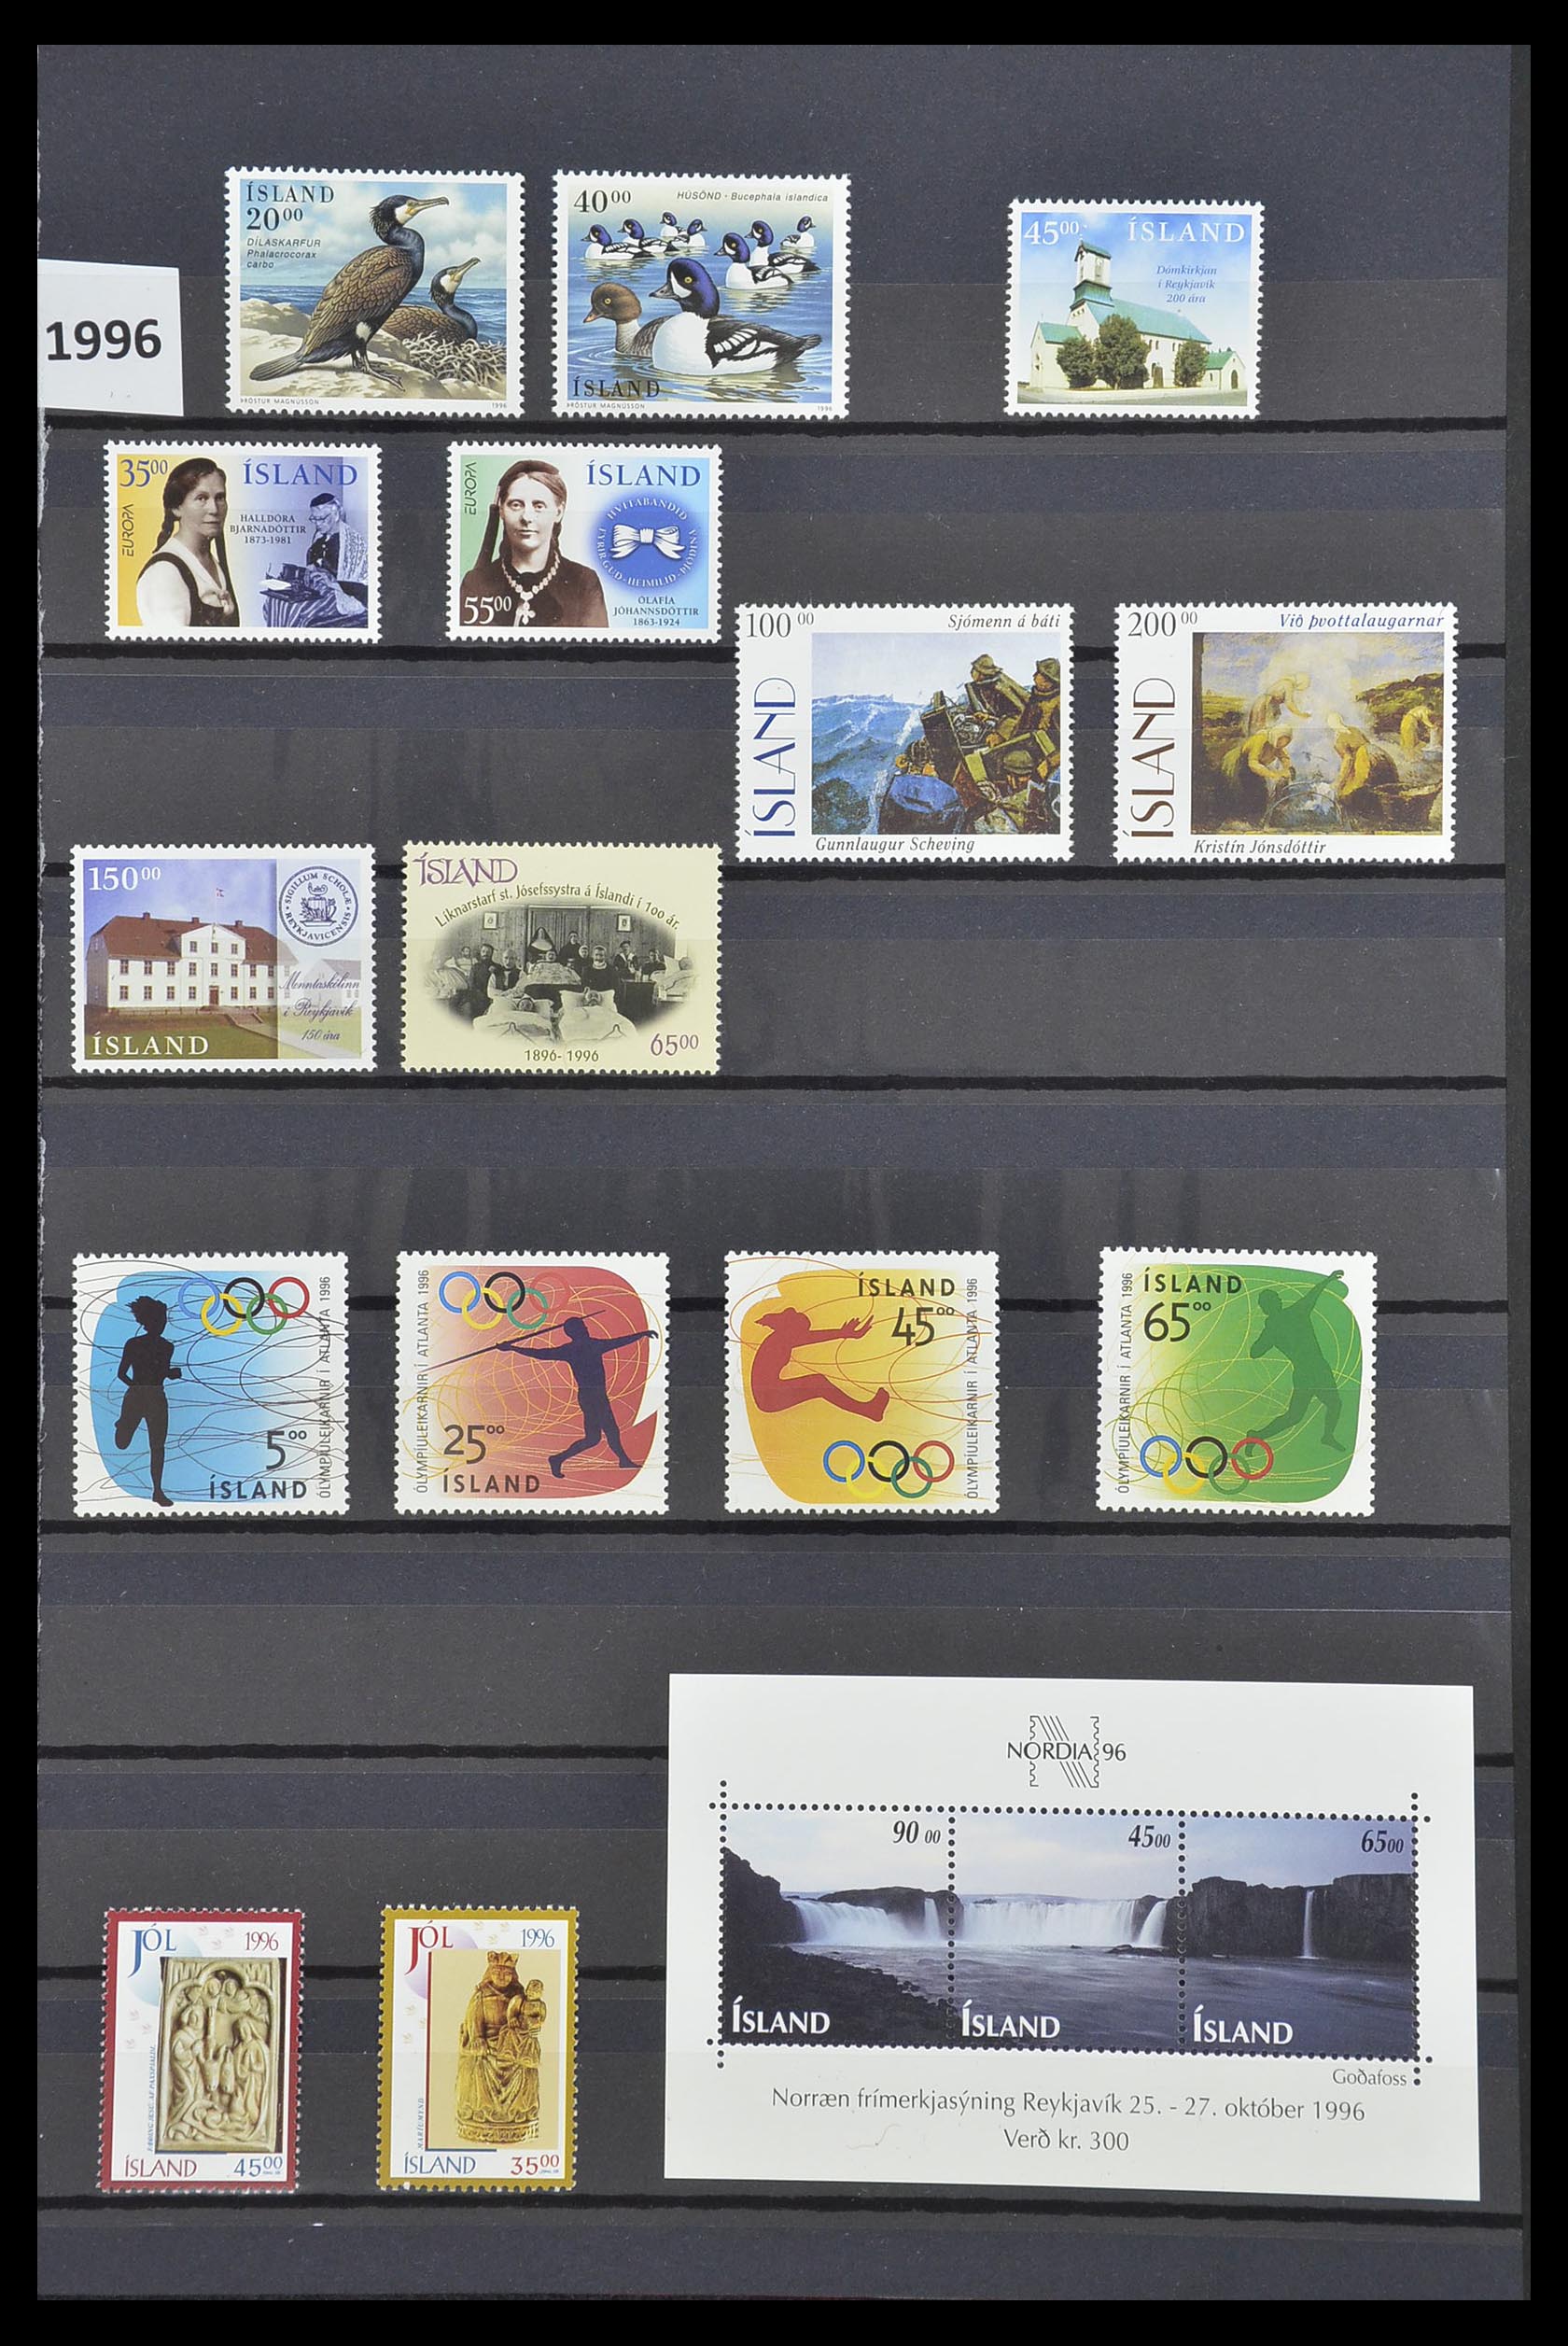 33726 116 - Stamp collection 33726 Scandinavia up to 2006.